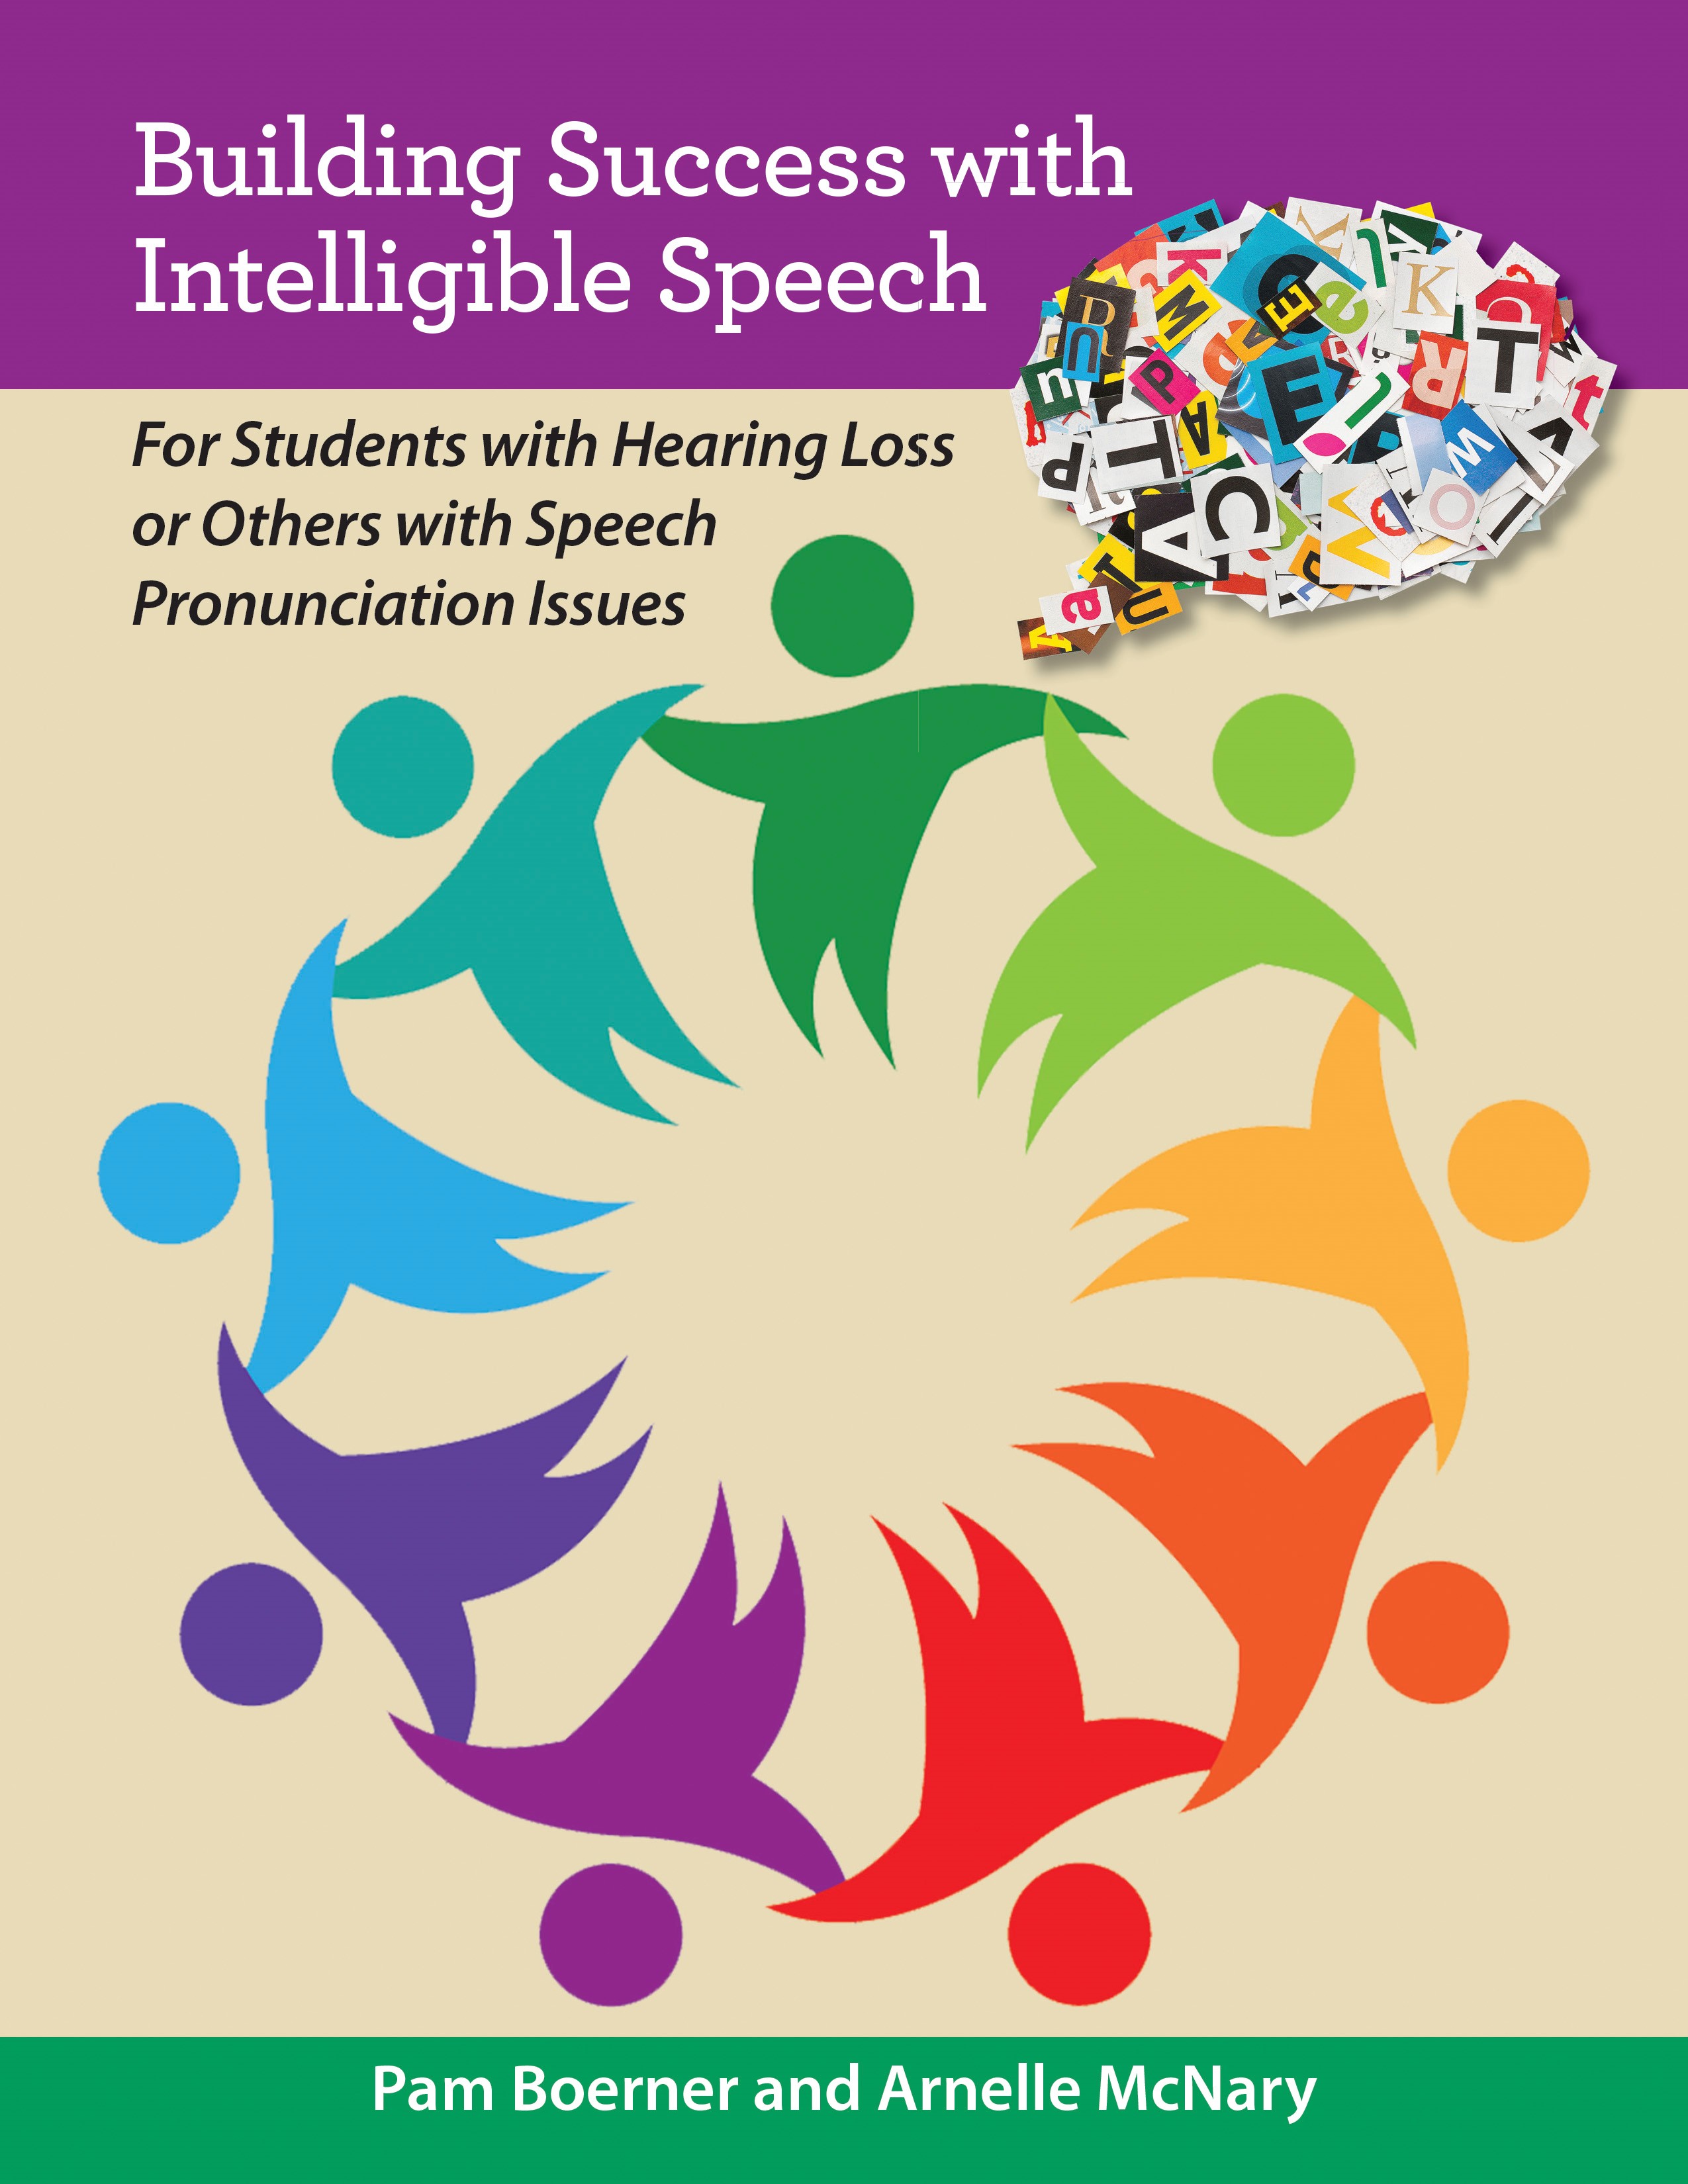 good speech intelligibility meaning